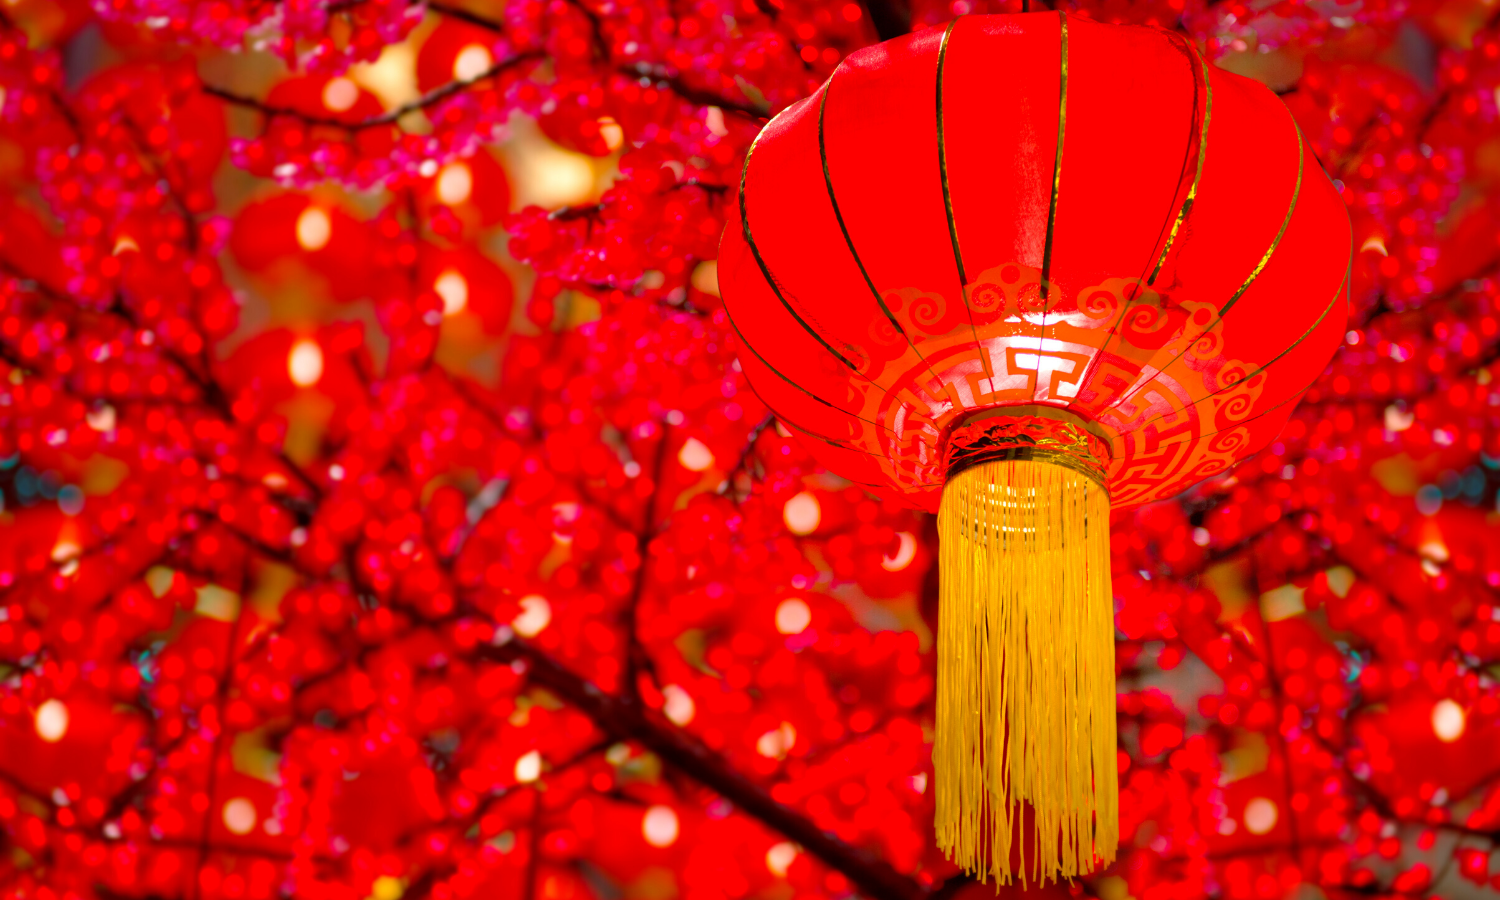 Red Chinese lantern hanging from a tree